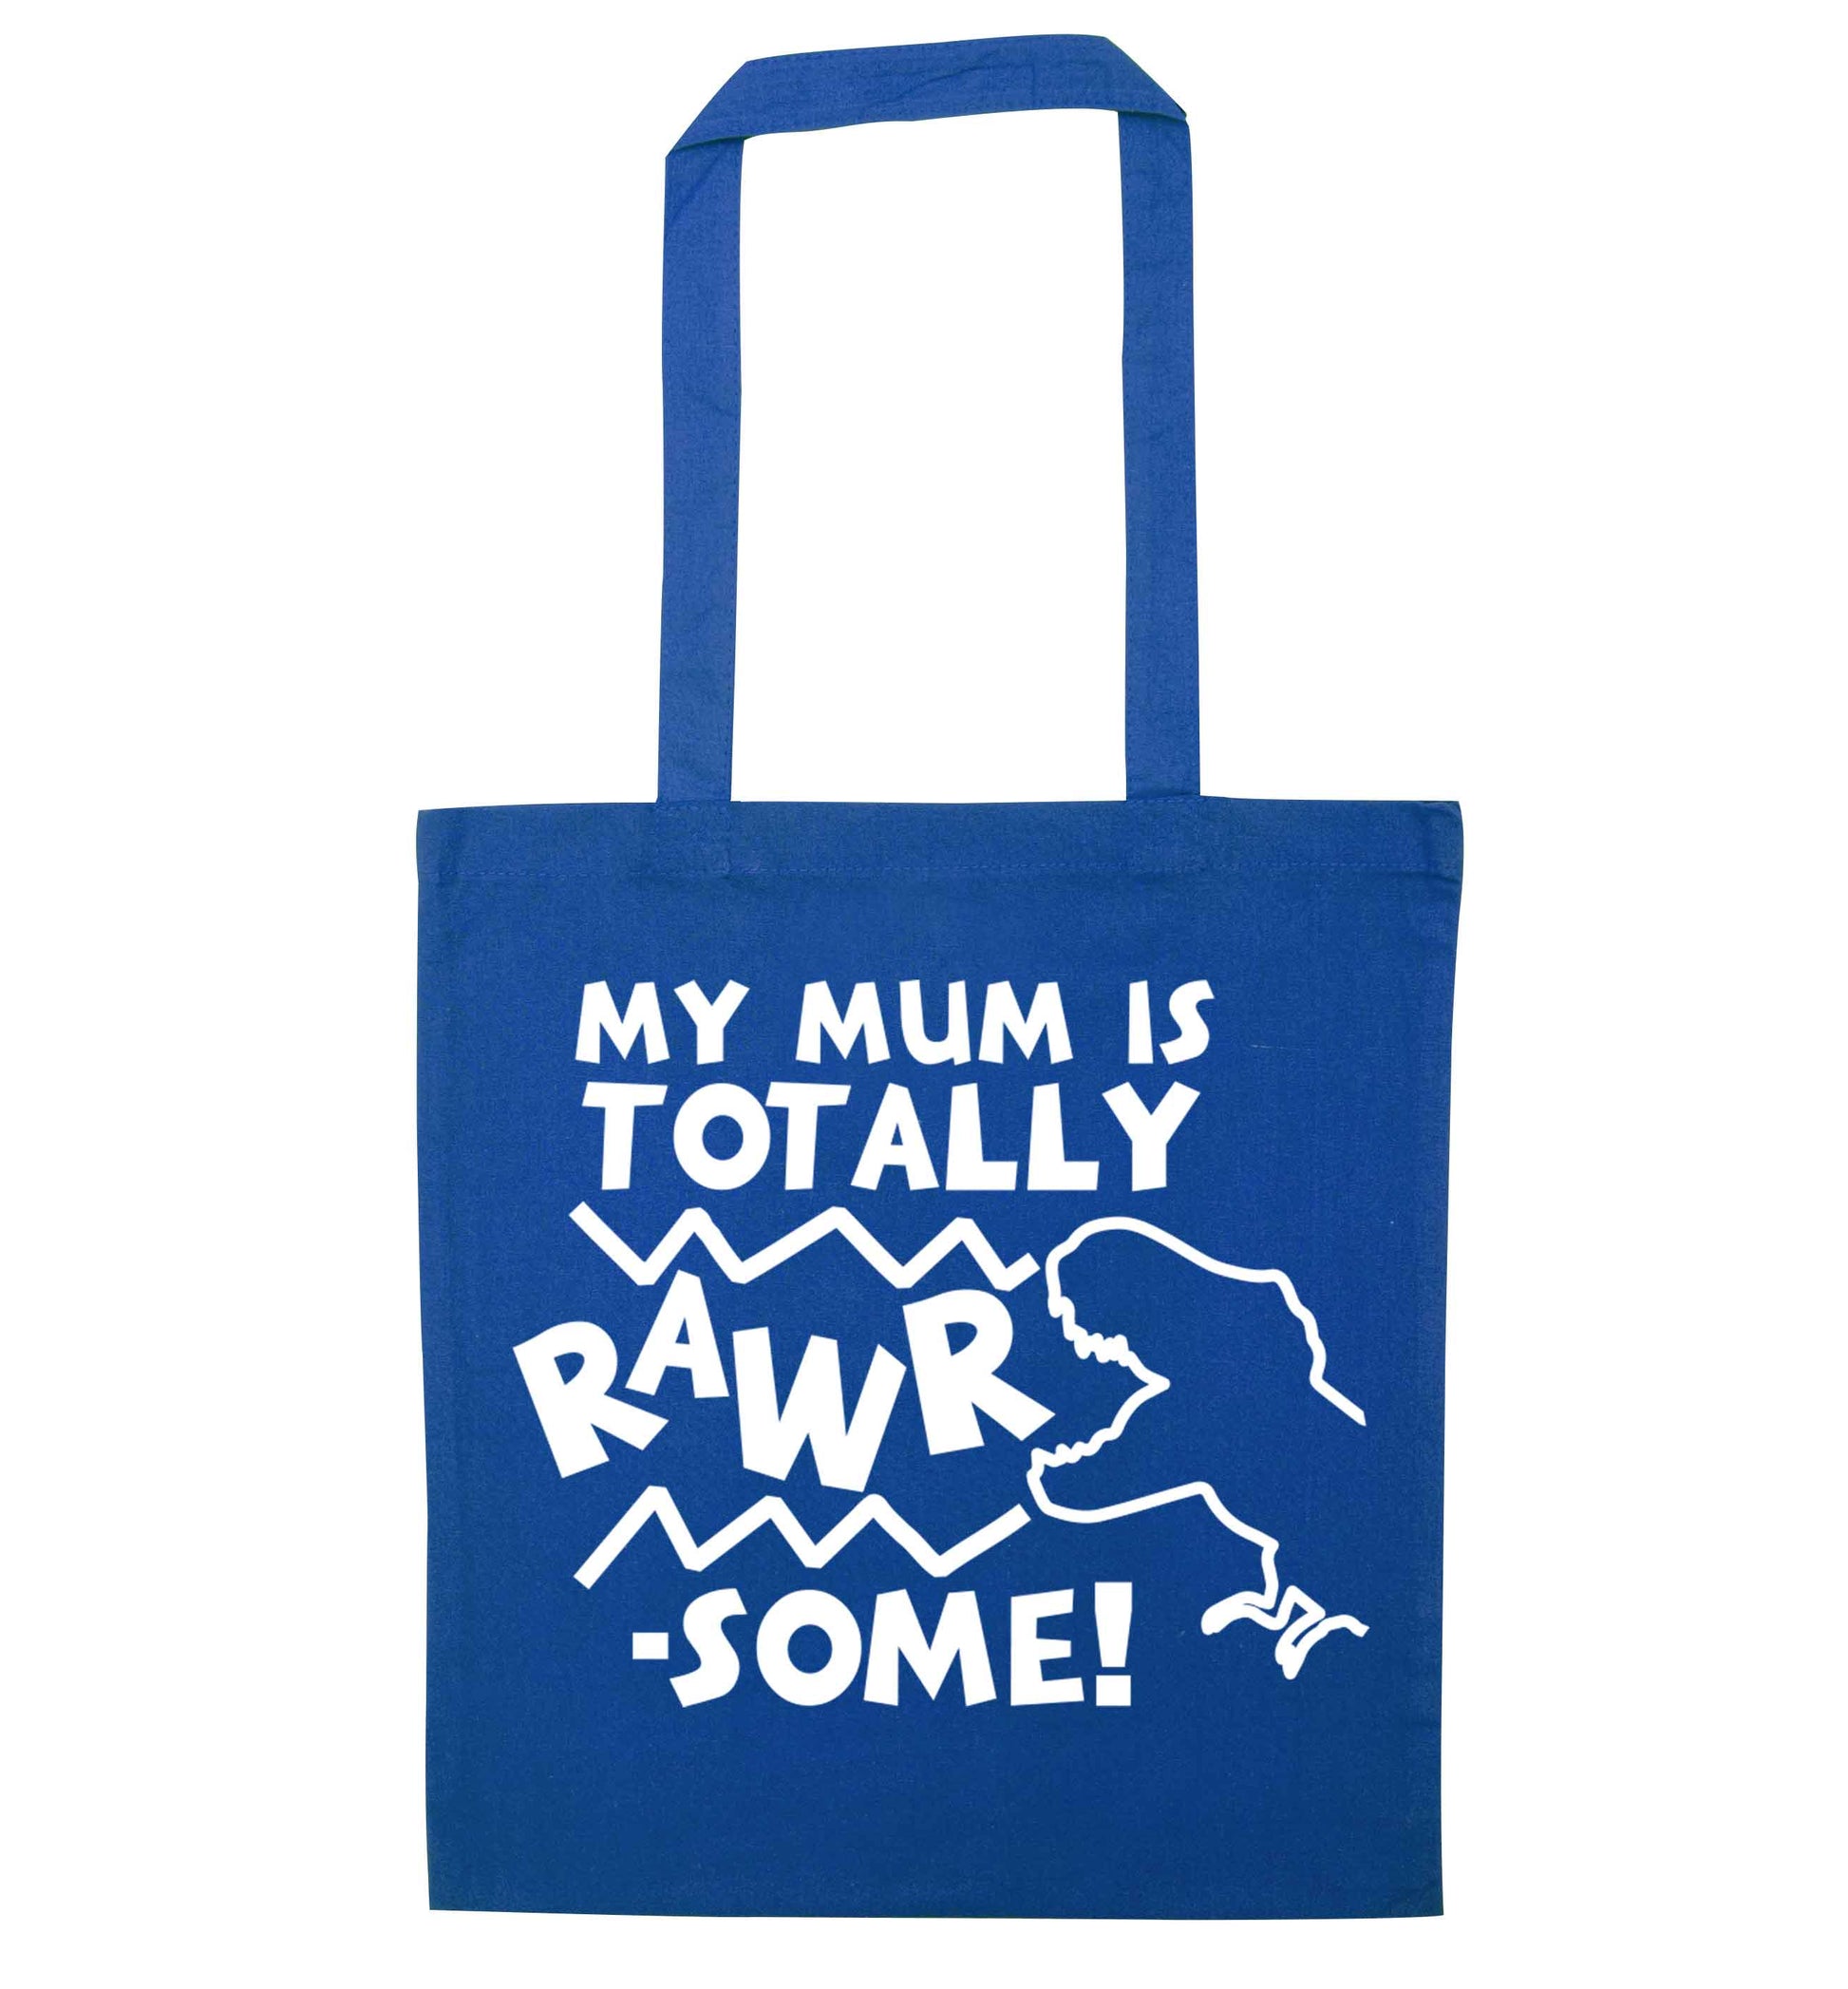 My mum is totally rawrsome blue tote bag